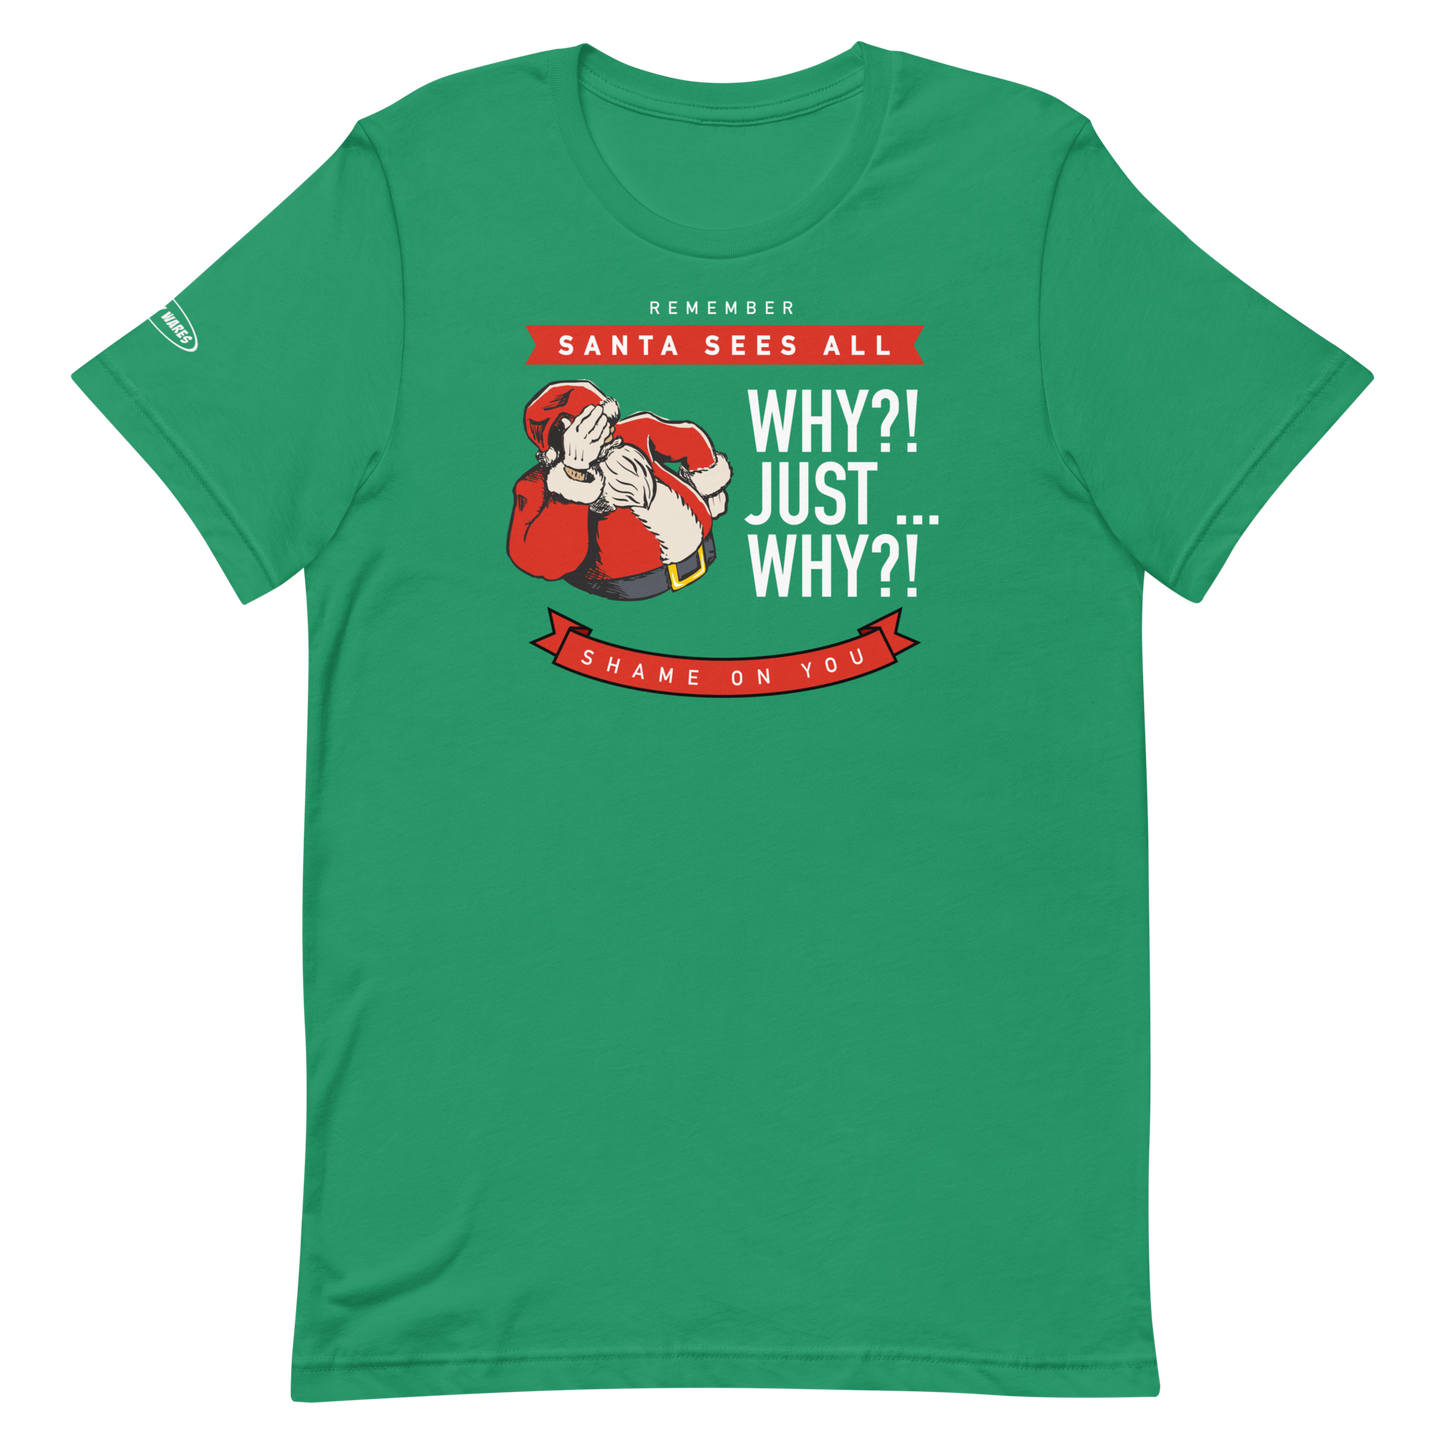 CHRISTMAS - Santa Sees All - Why?! Just ... Why?! - Funny t-shirt